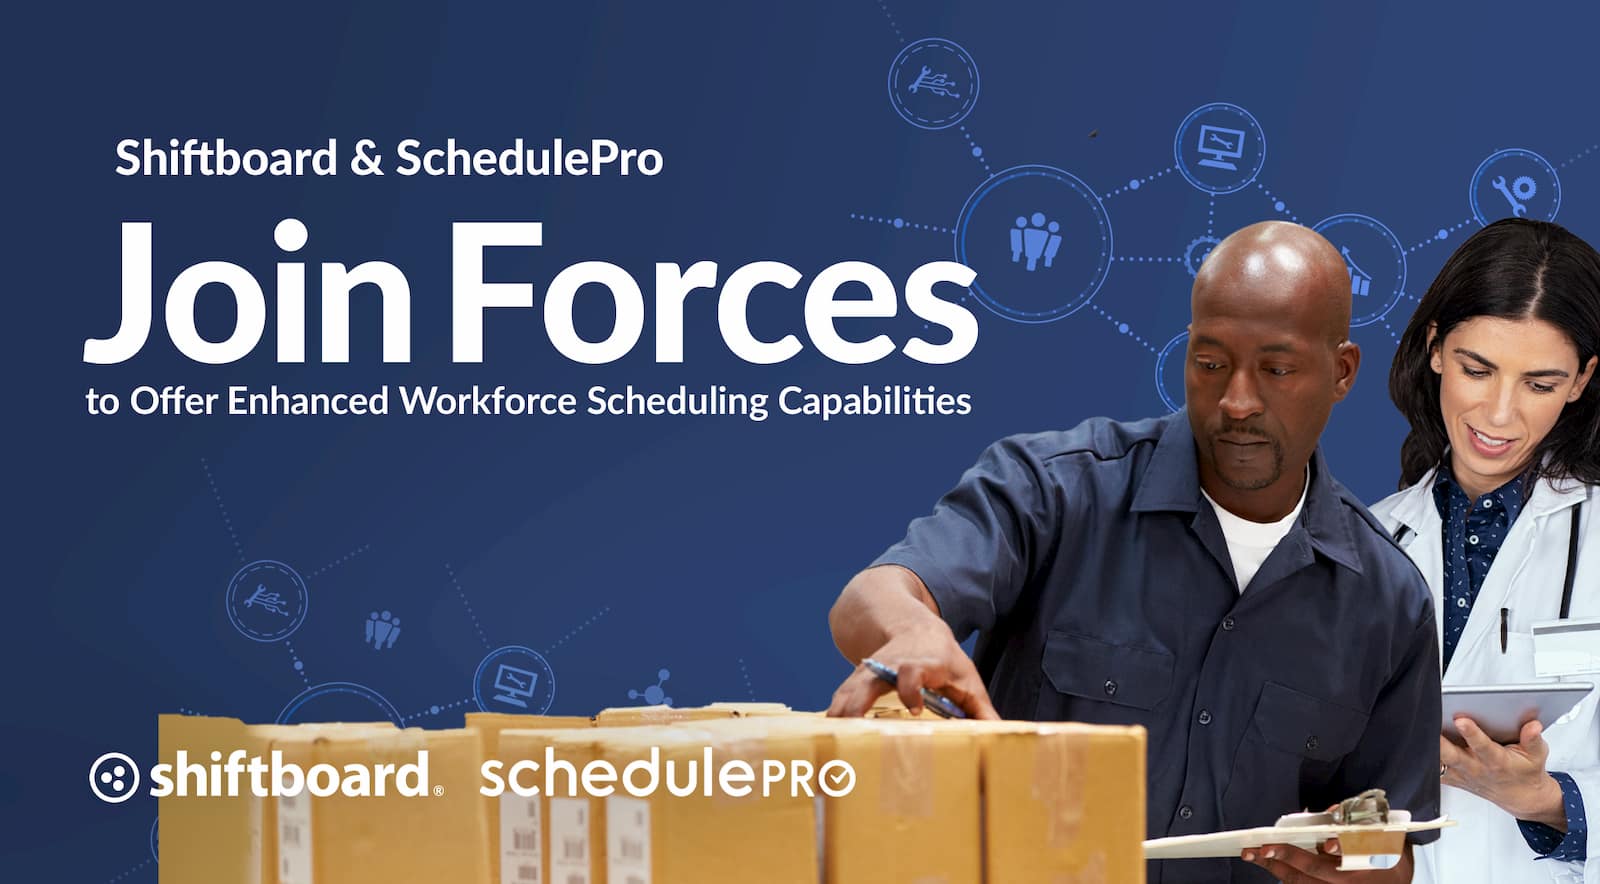 Shiftboard and SchedulePro Join Forces to Offer Enhanced Workforce Scheduling Capabilities